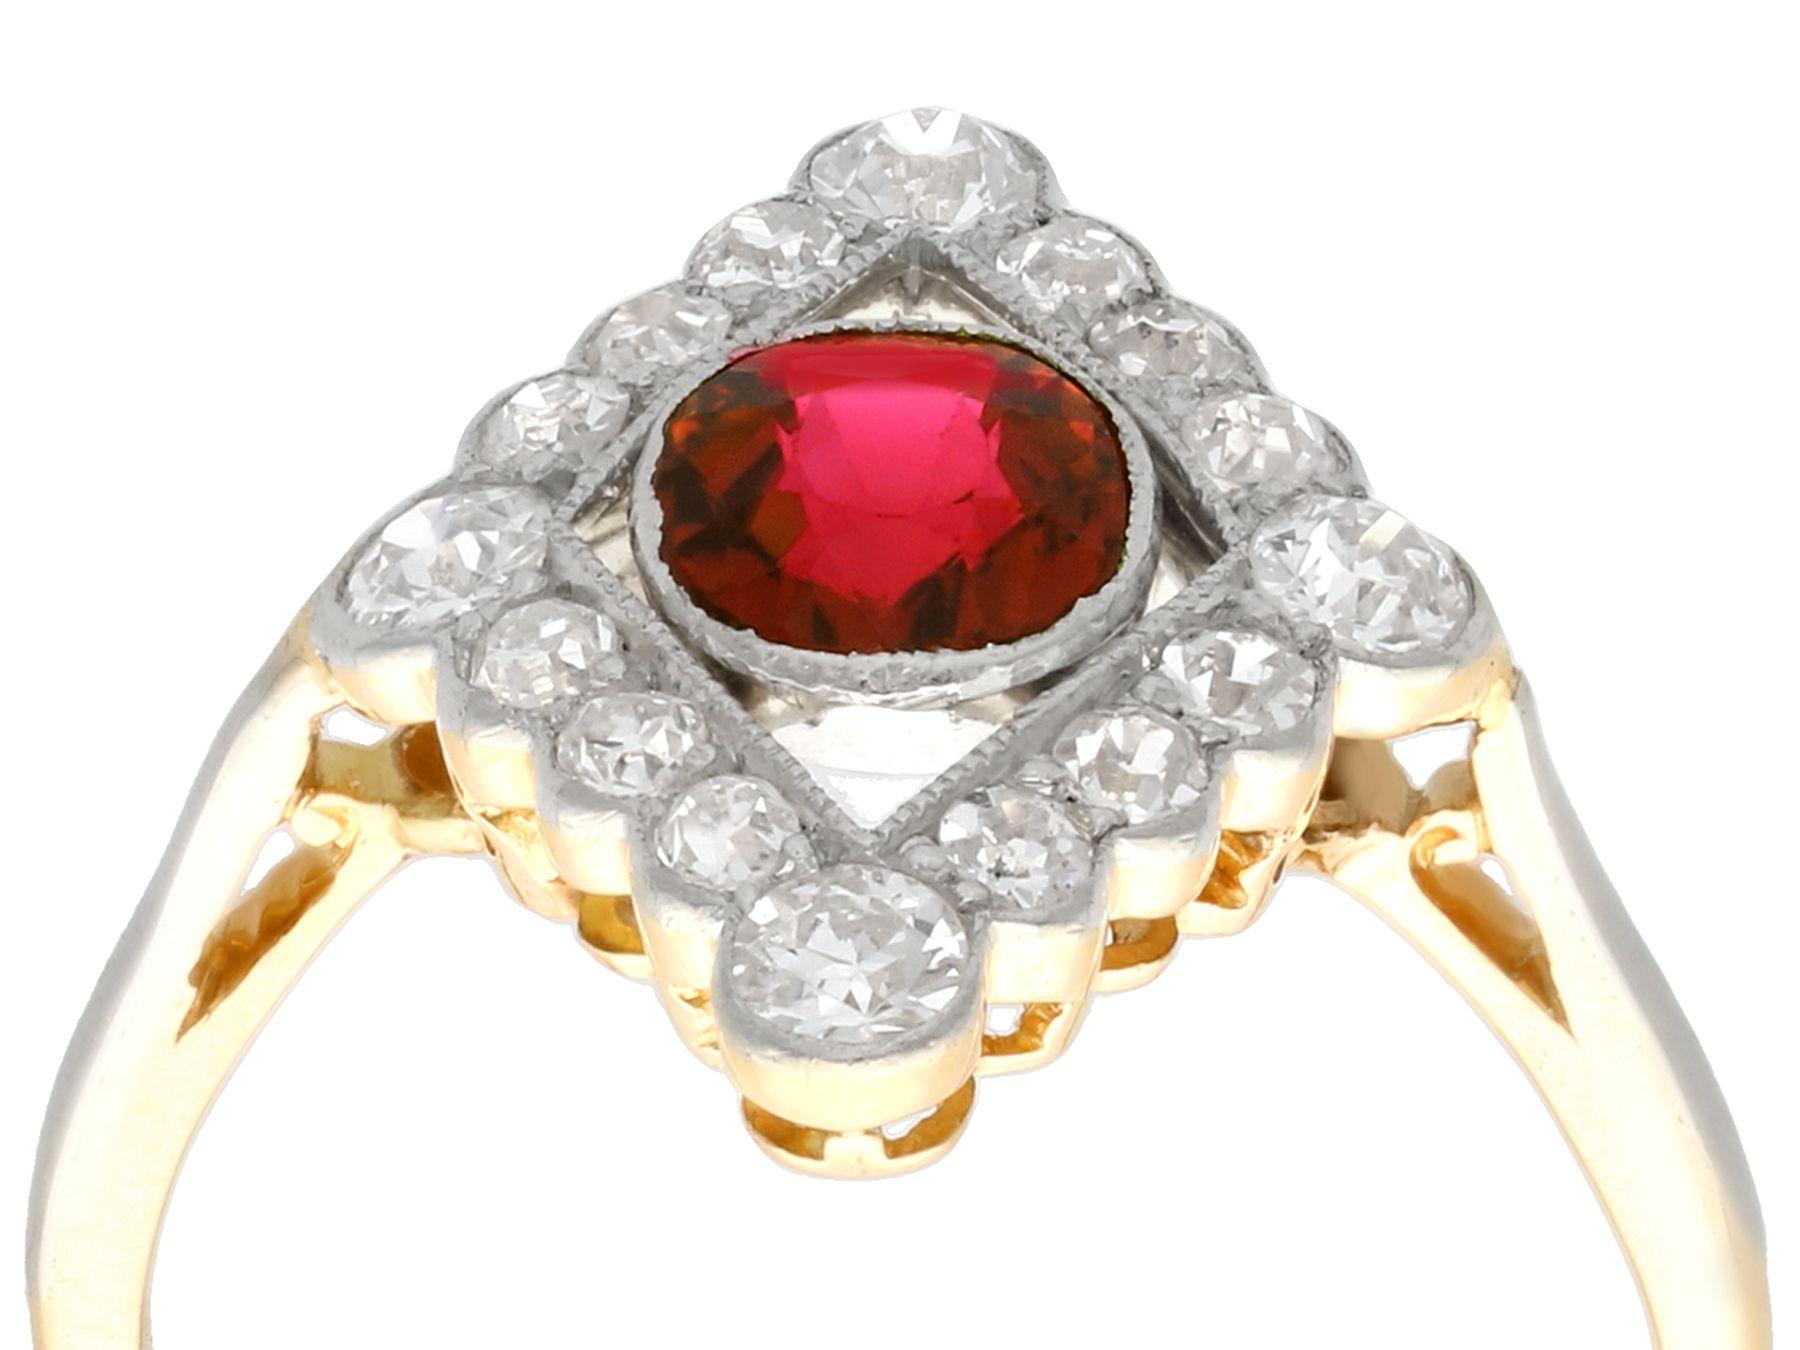 A stunning, fine and impressive antique 1.20ct Siam ruby and 1.09 carat diamond, 18 karat yellow gold and platinum set dress ring; part of our diverse antique jewellery and estate jewelry collections.

This stunning antique ruby ring has been